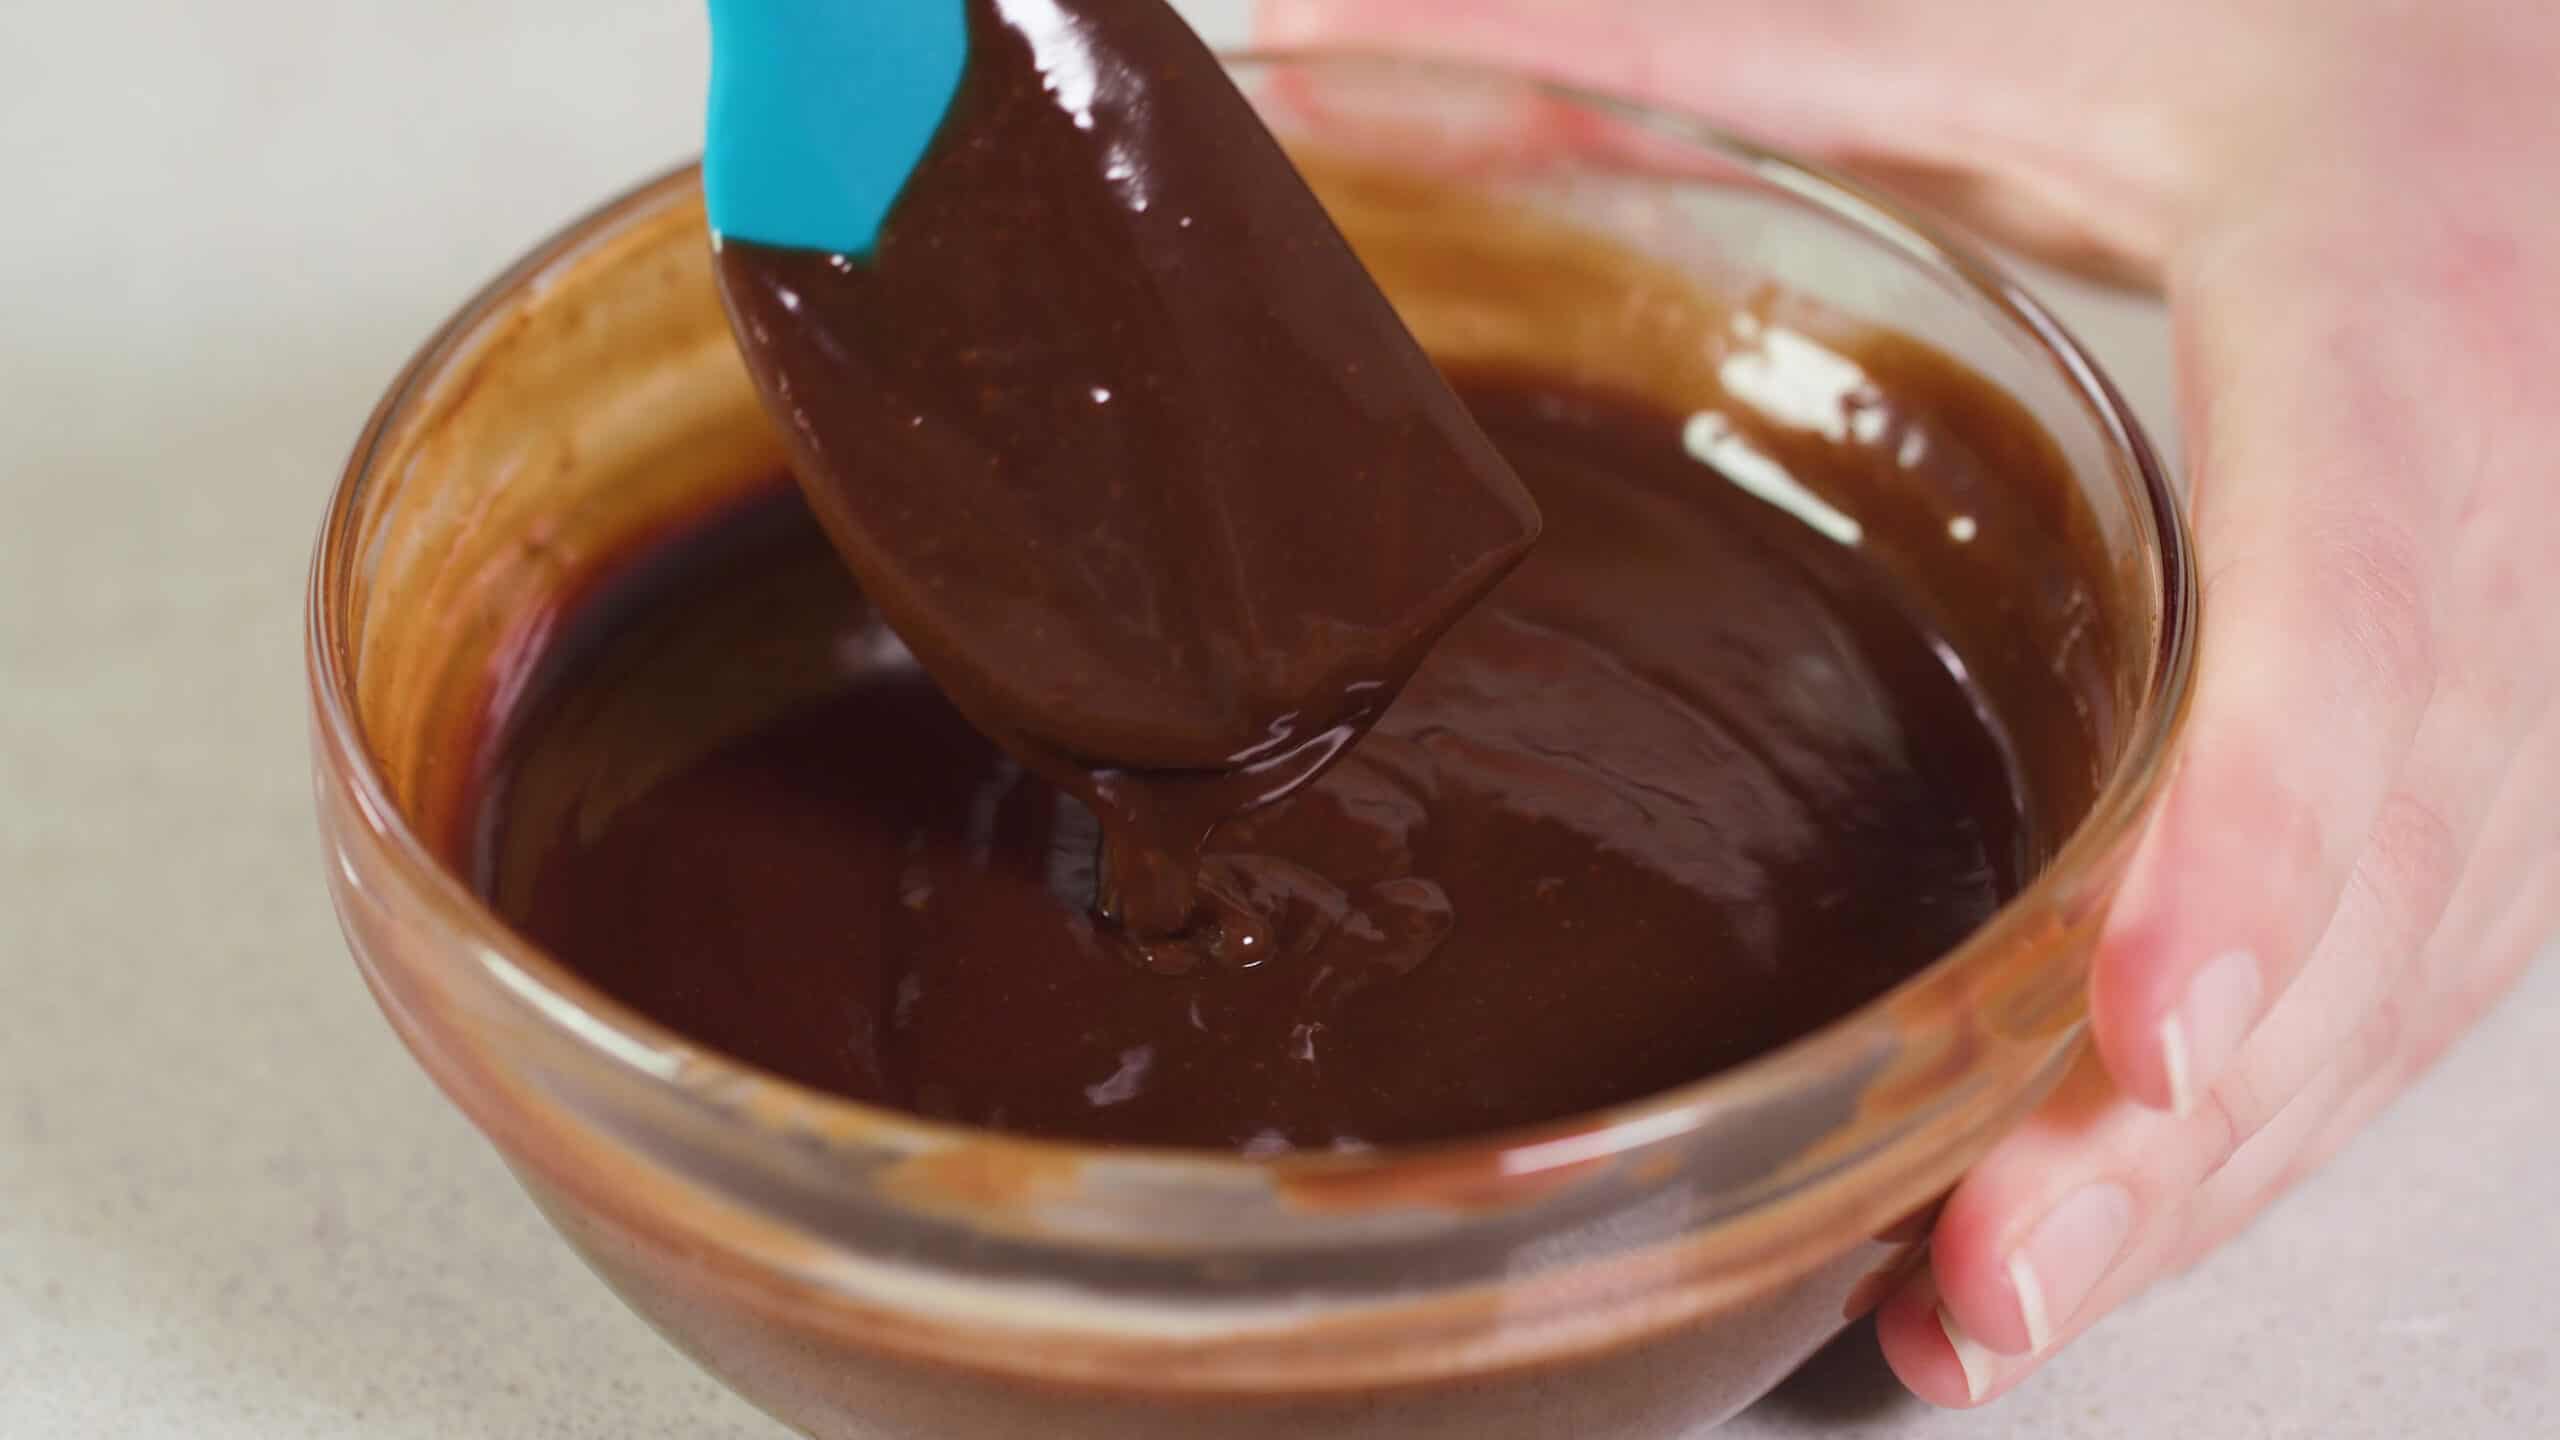 Close-up view of medium sized clear glass mixing bowl filled with rich chocolate frosting also dripping from a plastic spatula.